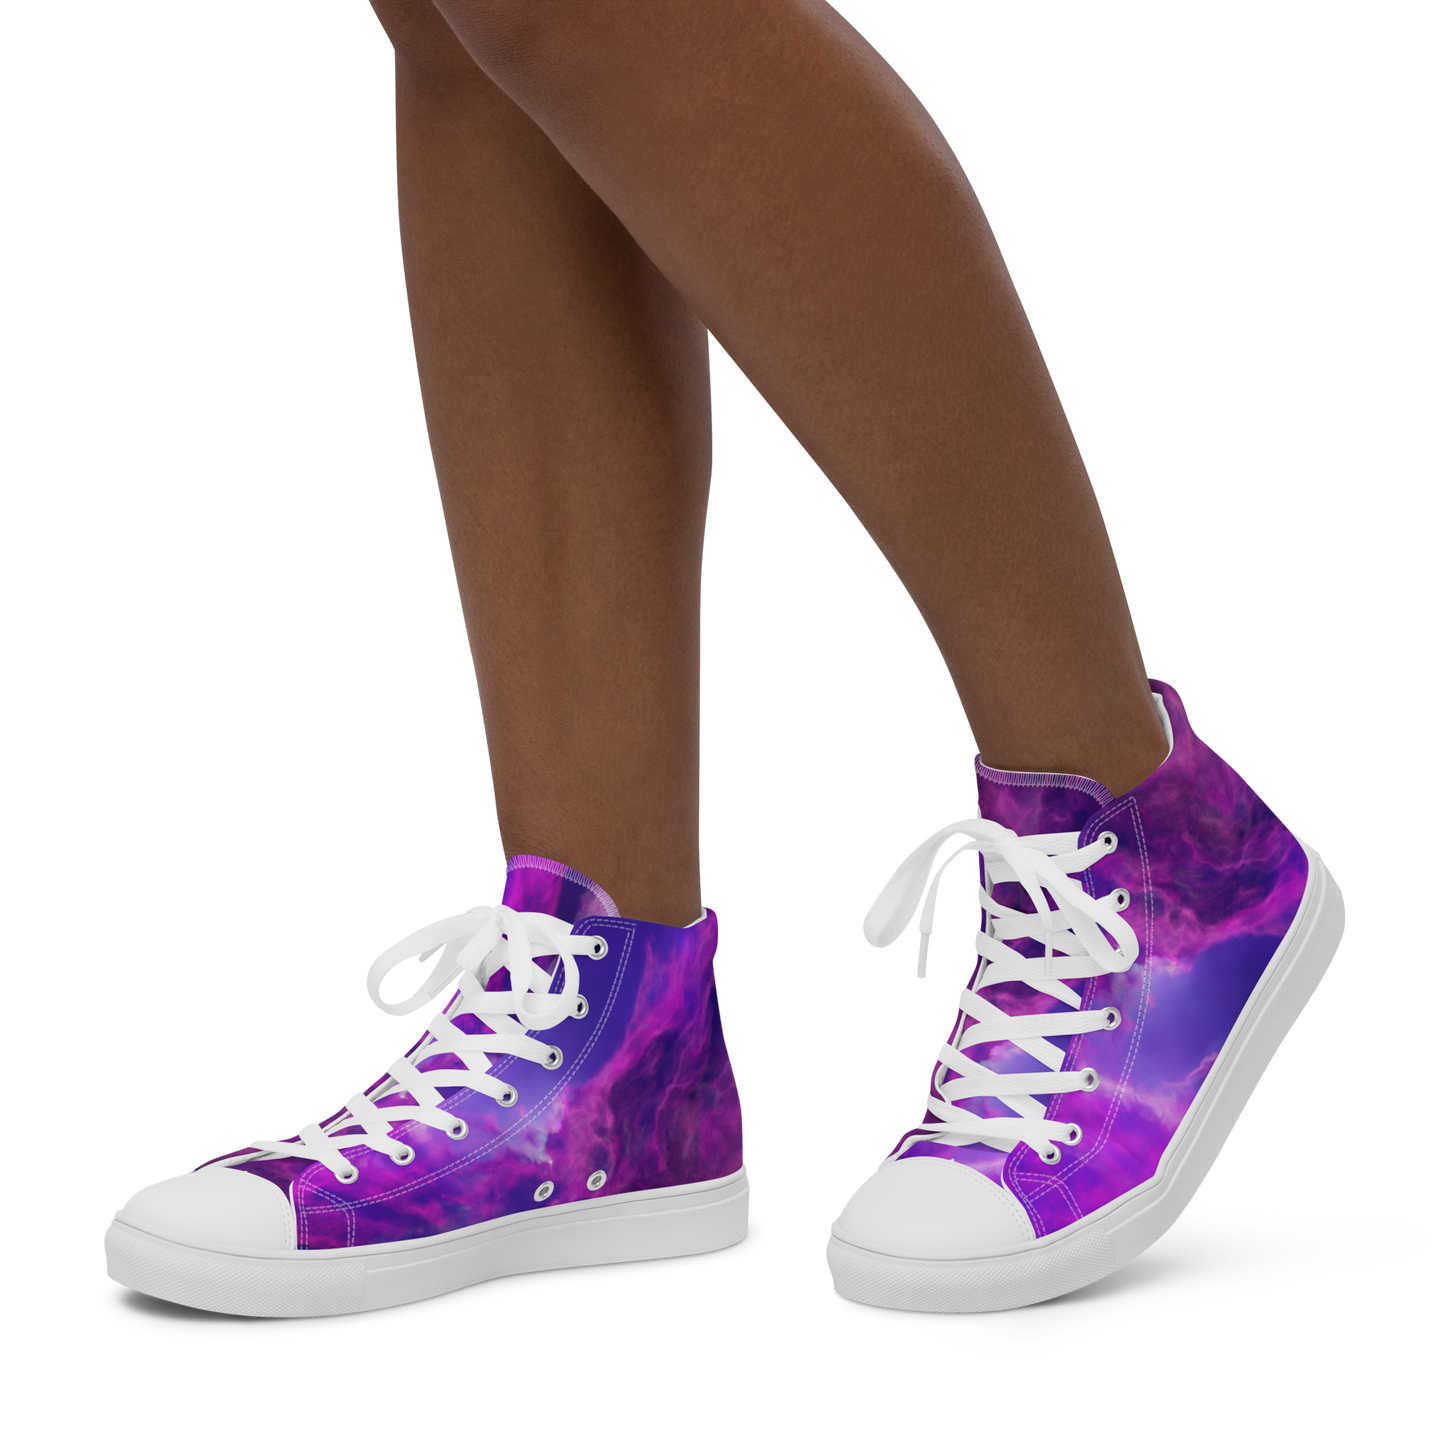 'Almost A Sky' Nebula Style Design Women’s high top canvas shoes